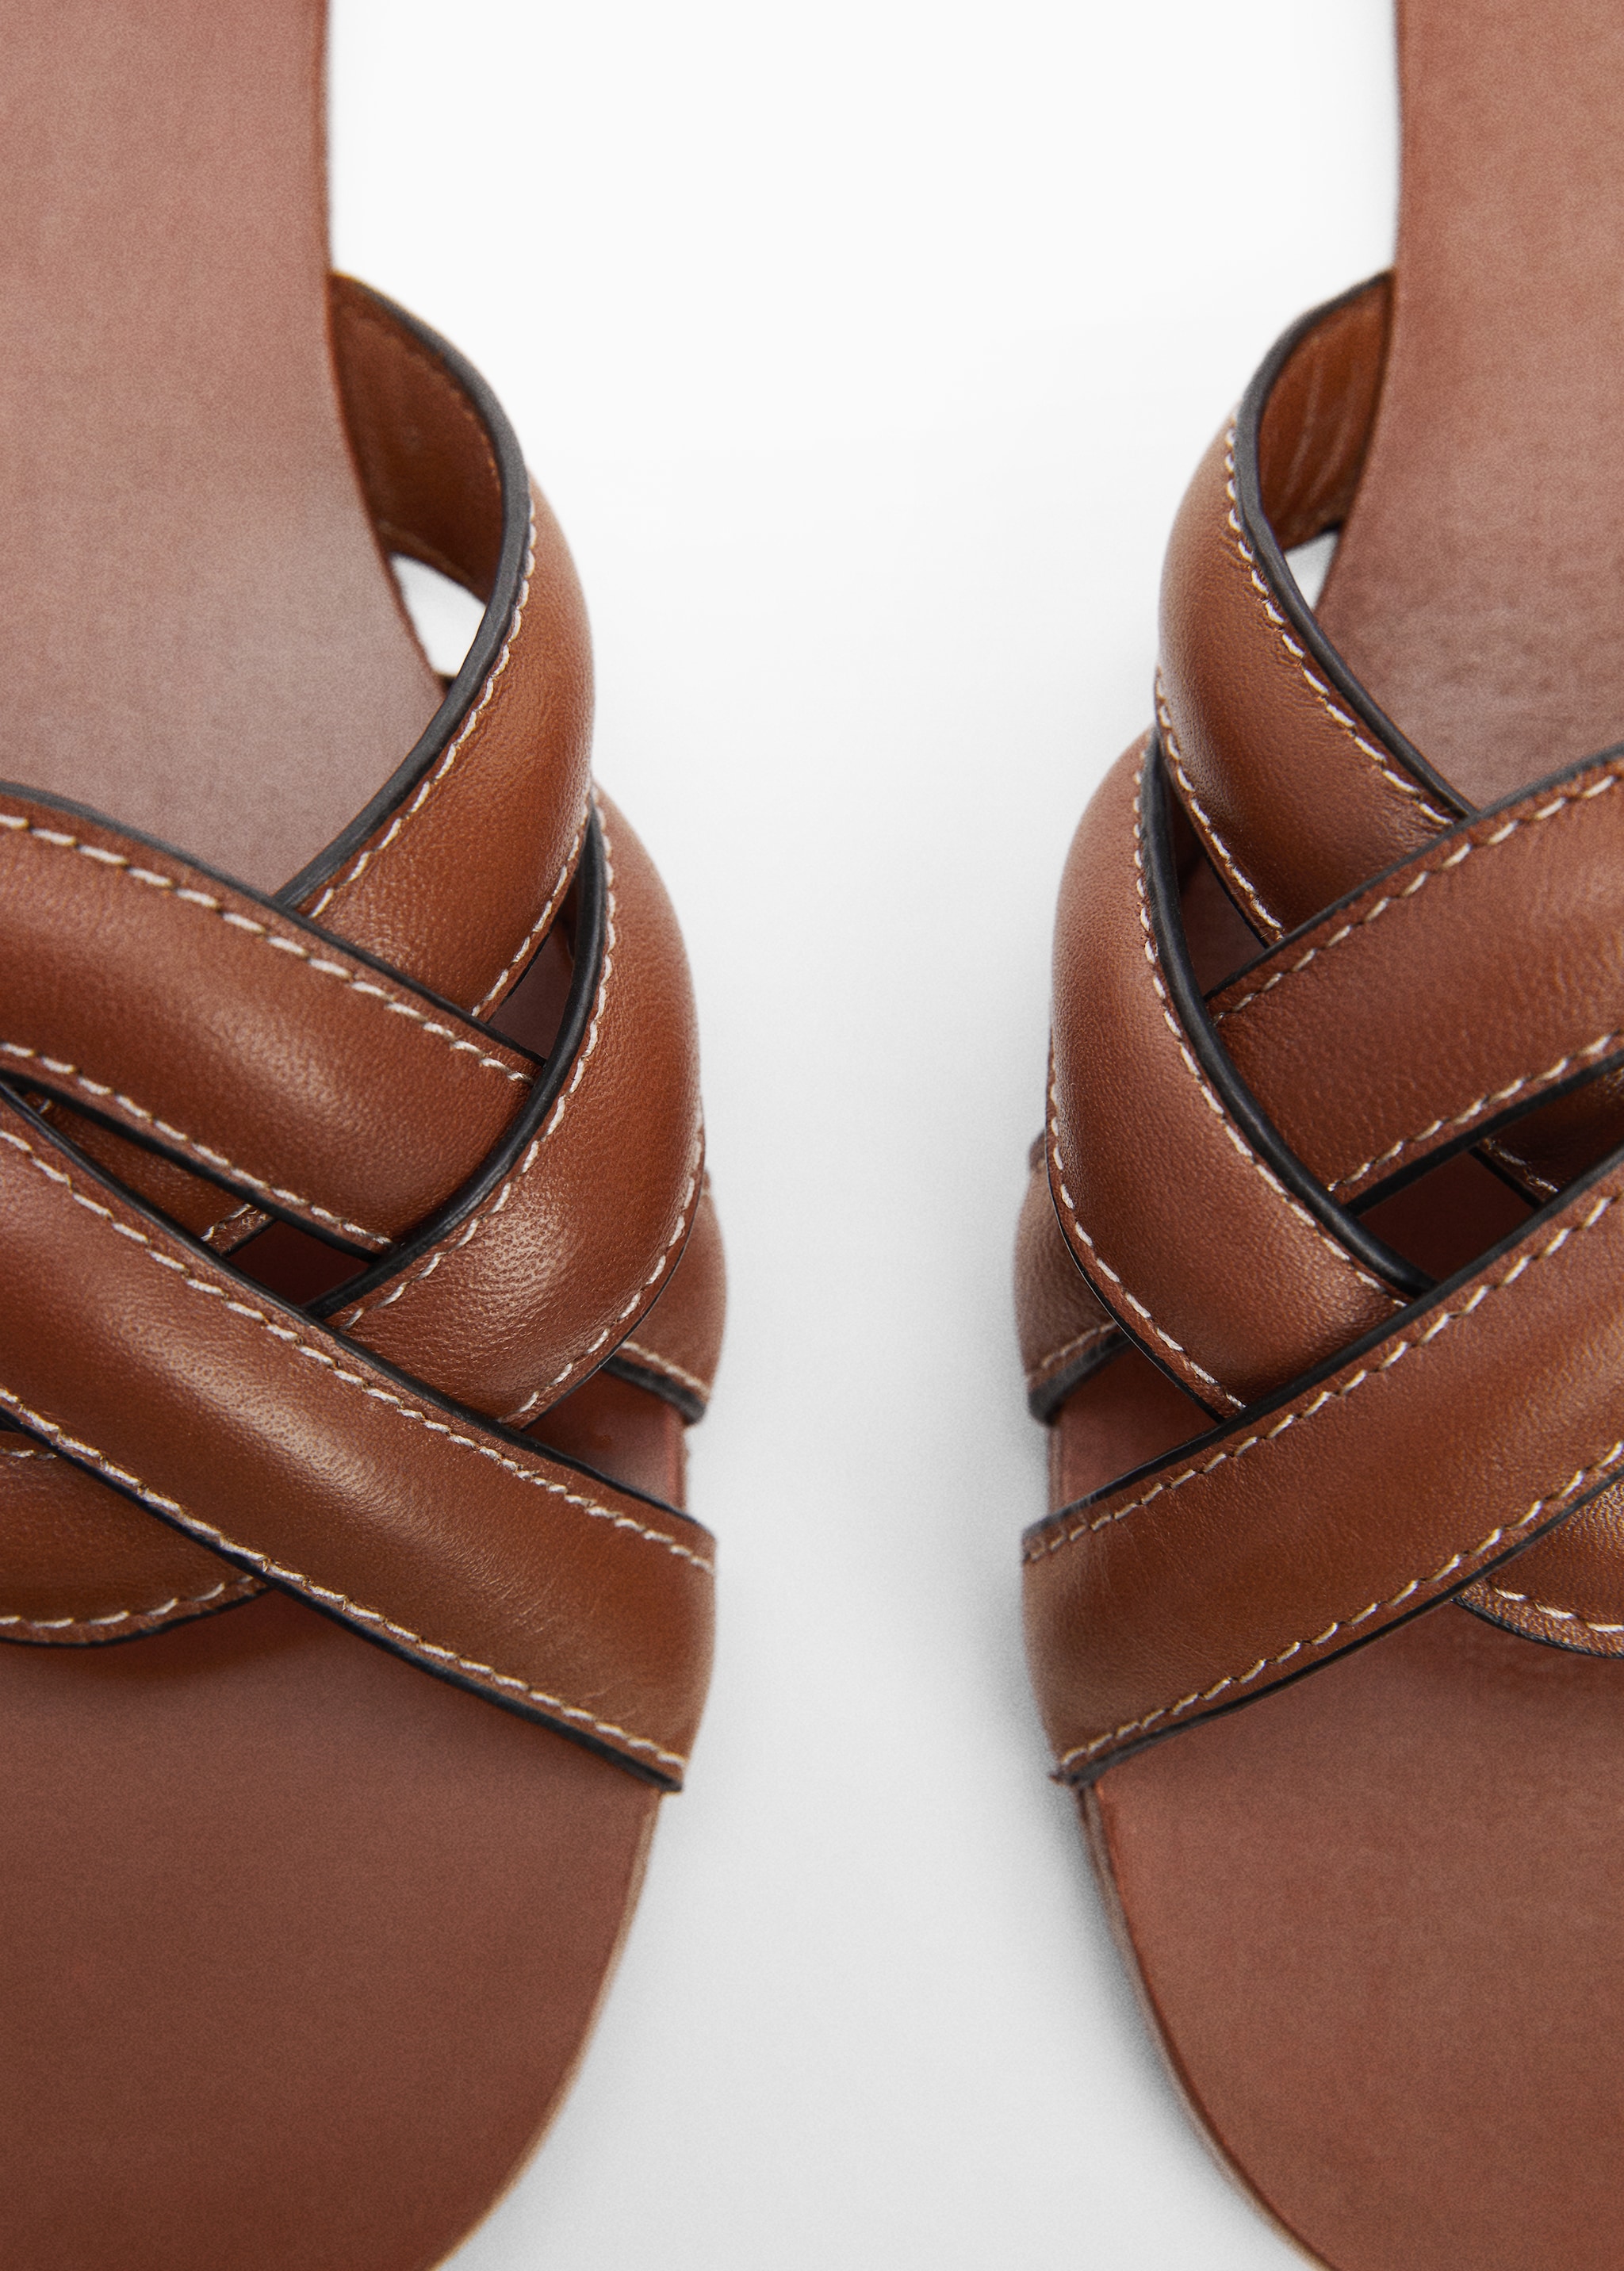 Leather straps sandals - Details of the article 2